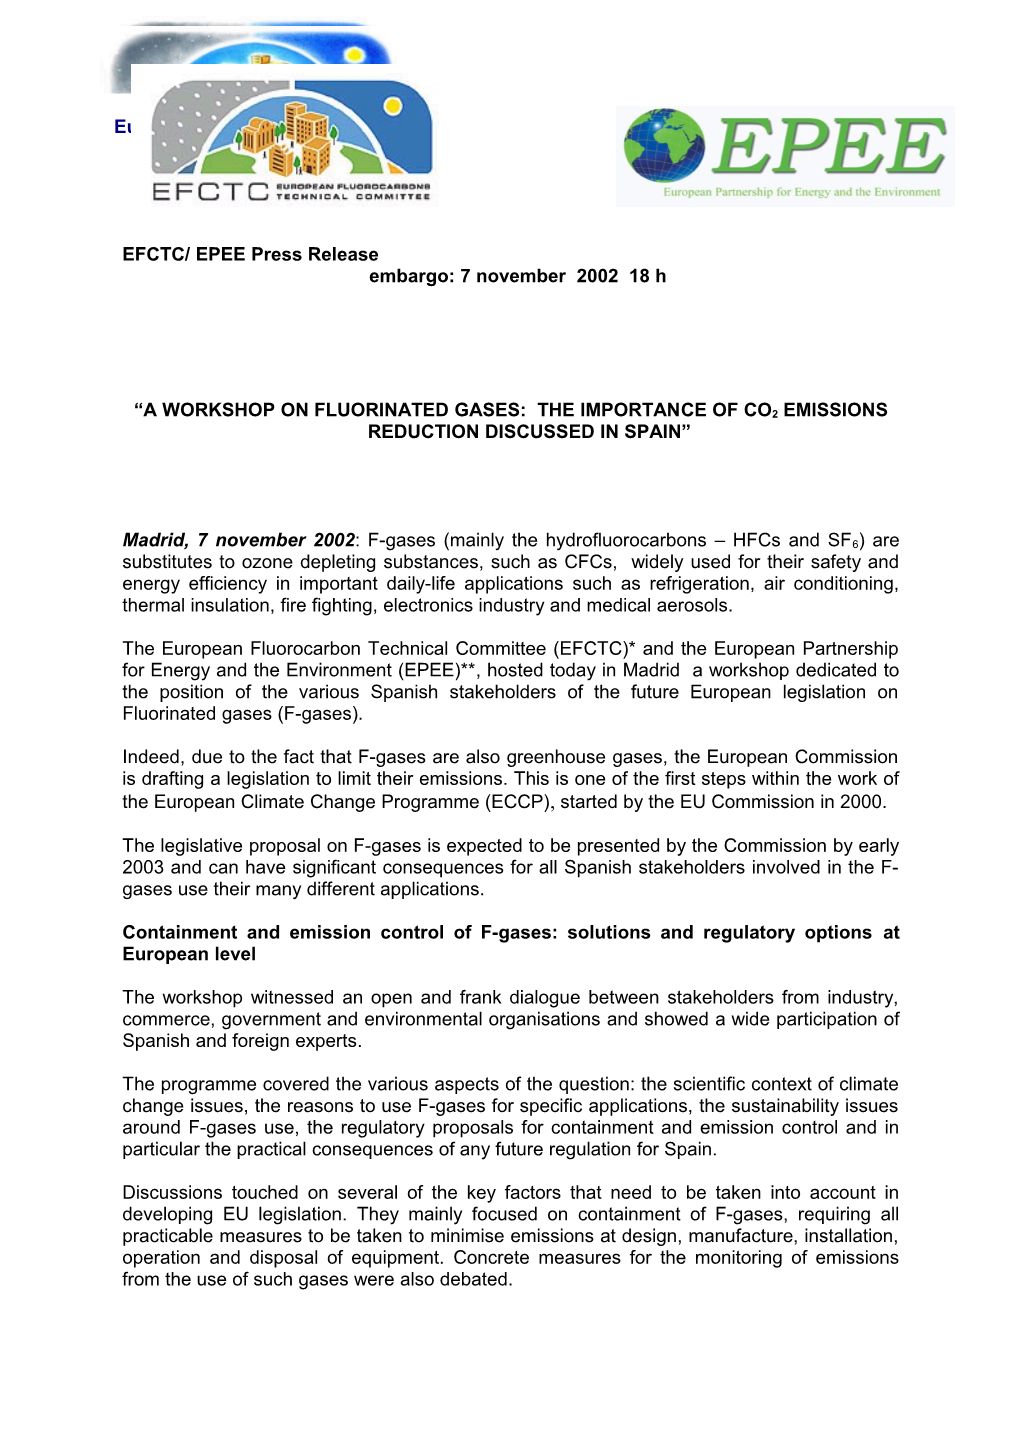 EPEE/EFCTC Draft Press Release